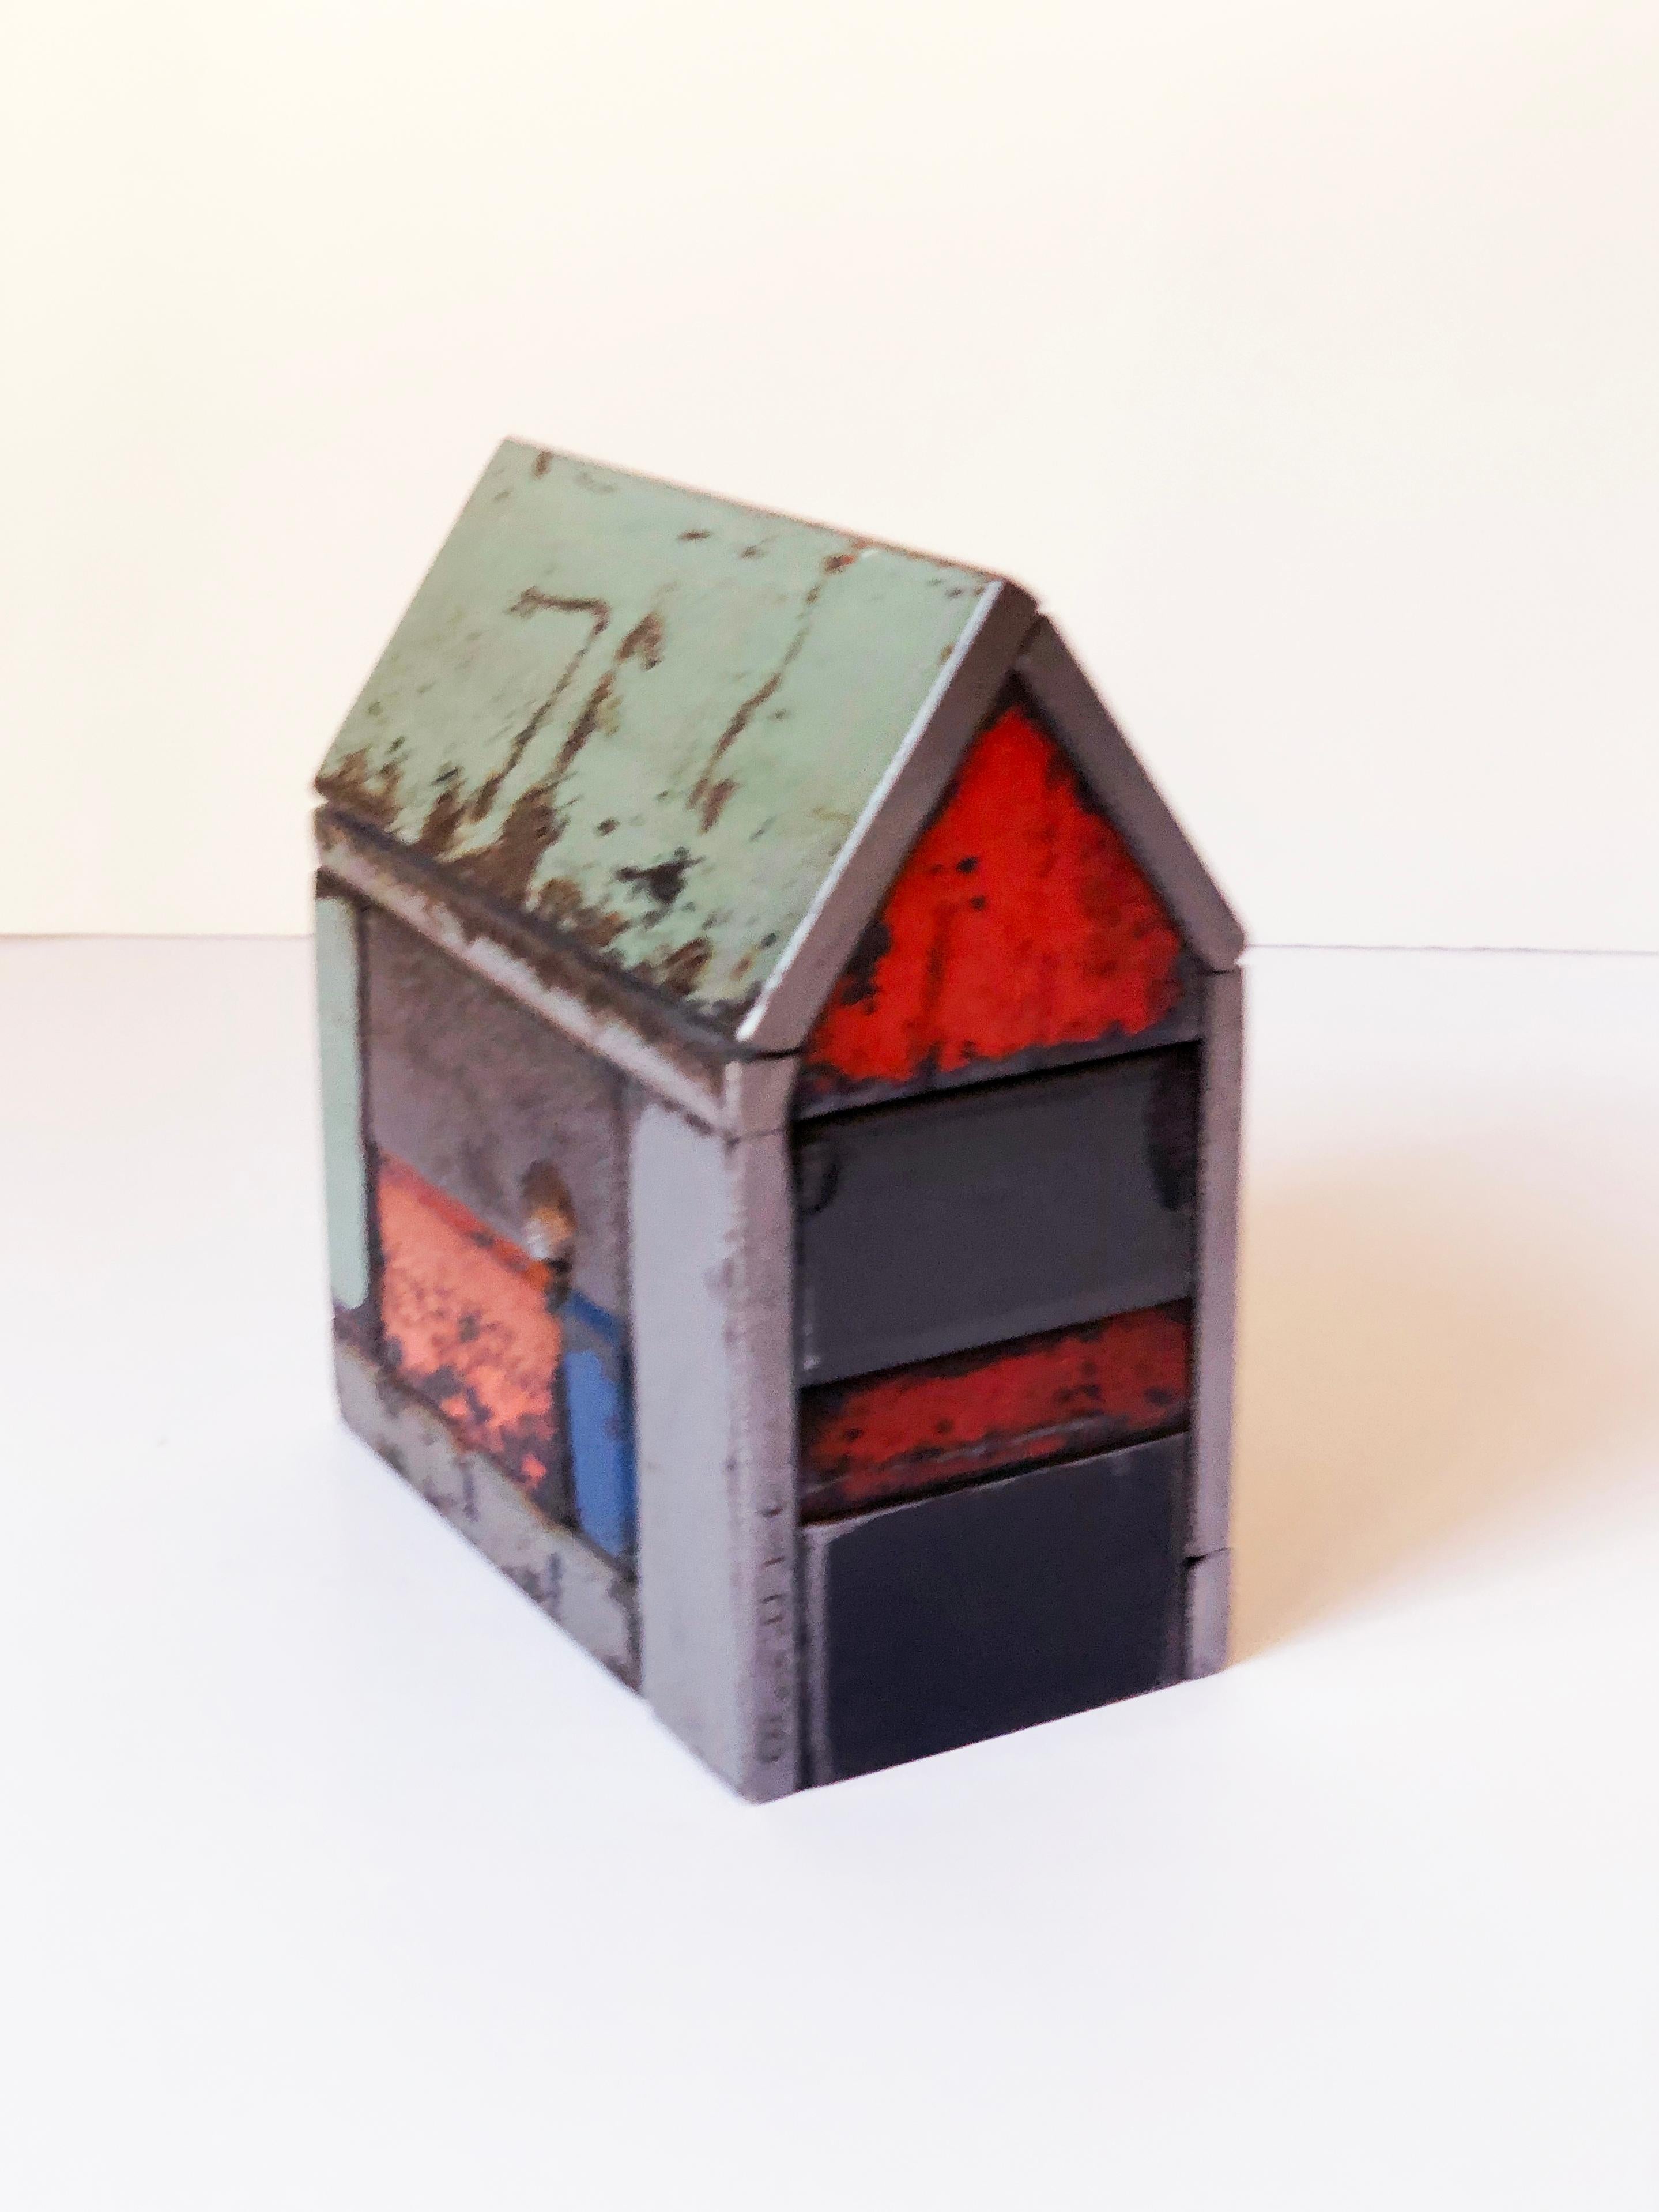 Folk Art Collection of Three Barn House Structures by Jim Rose, Welded Salvaged Steel